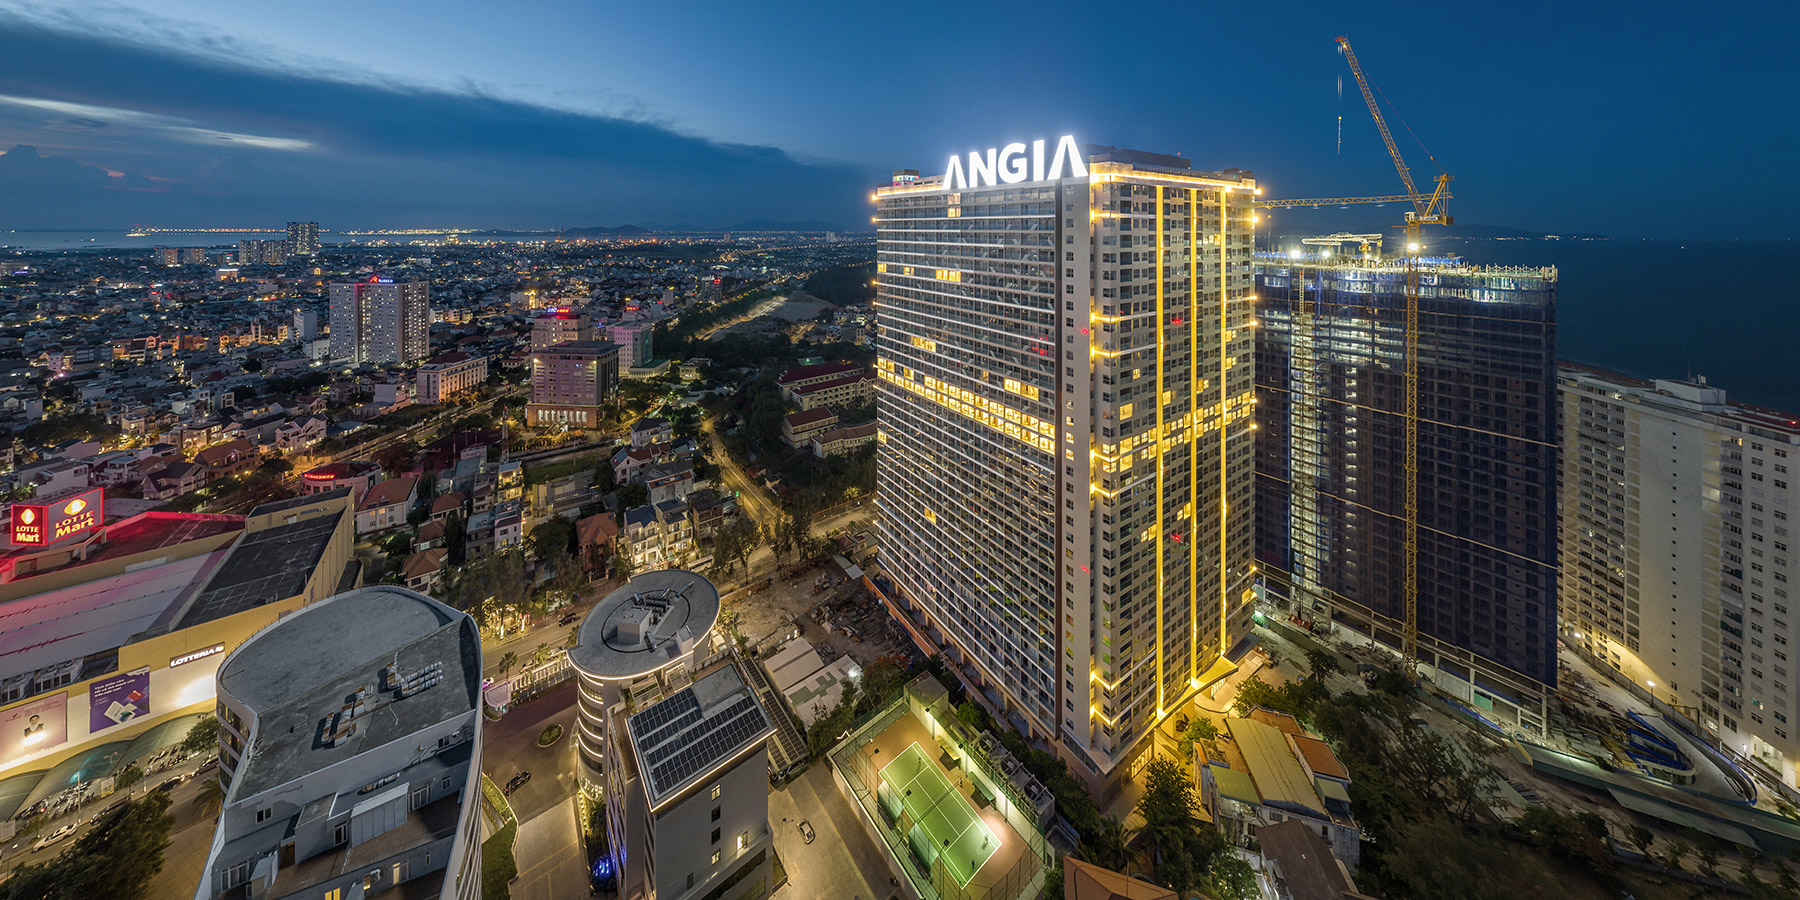 Angia Group - The Song Vung Tau